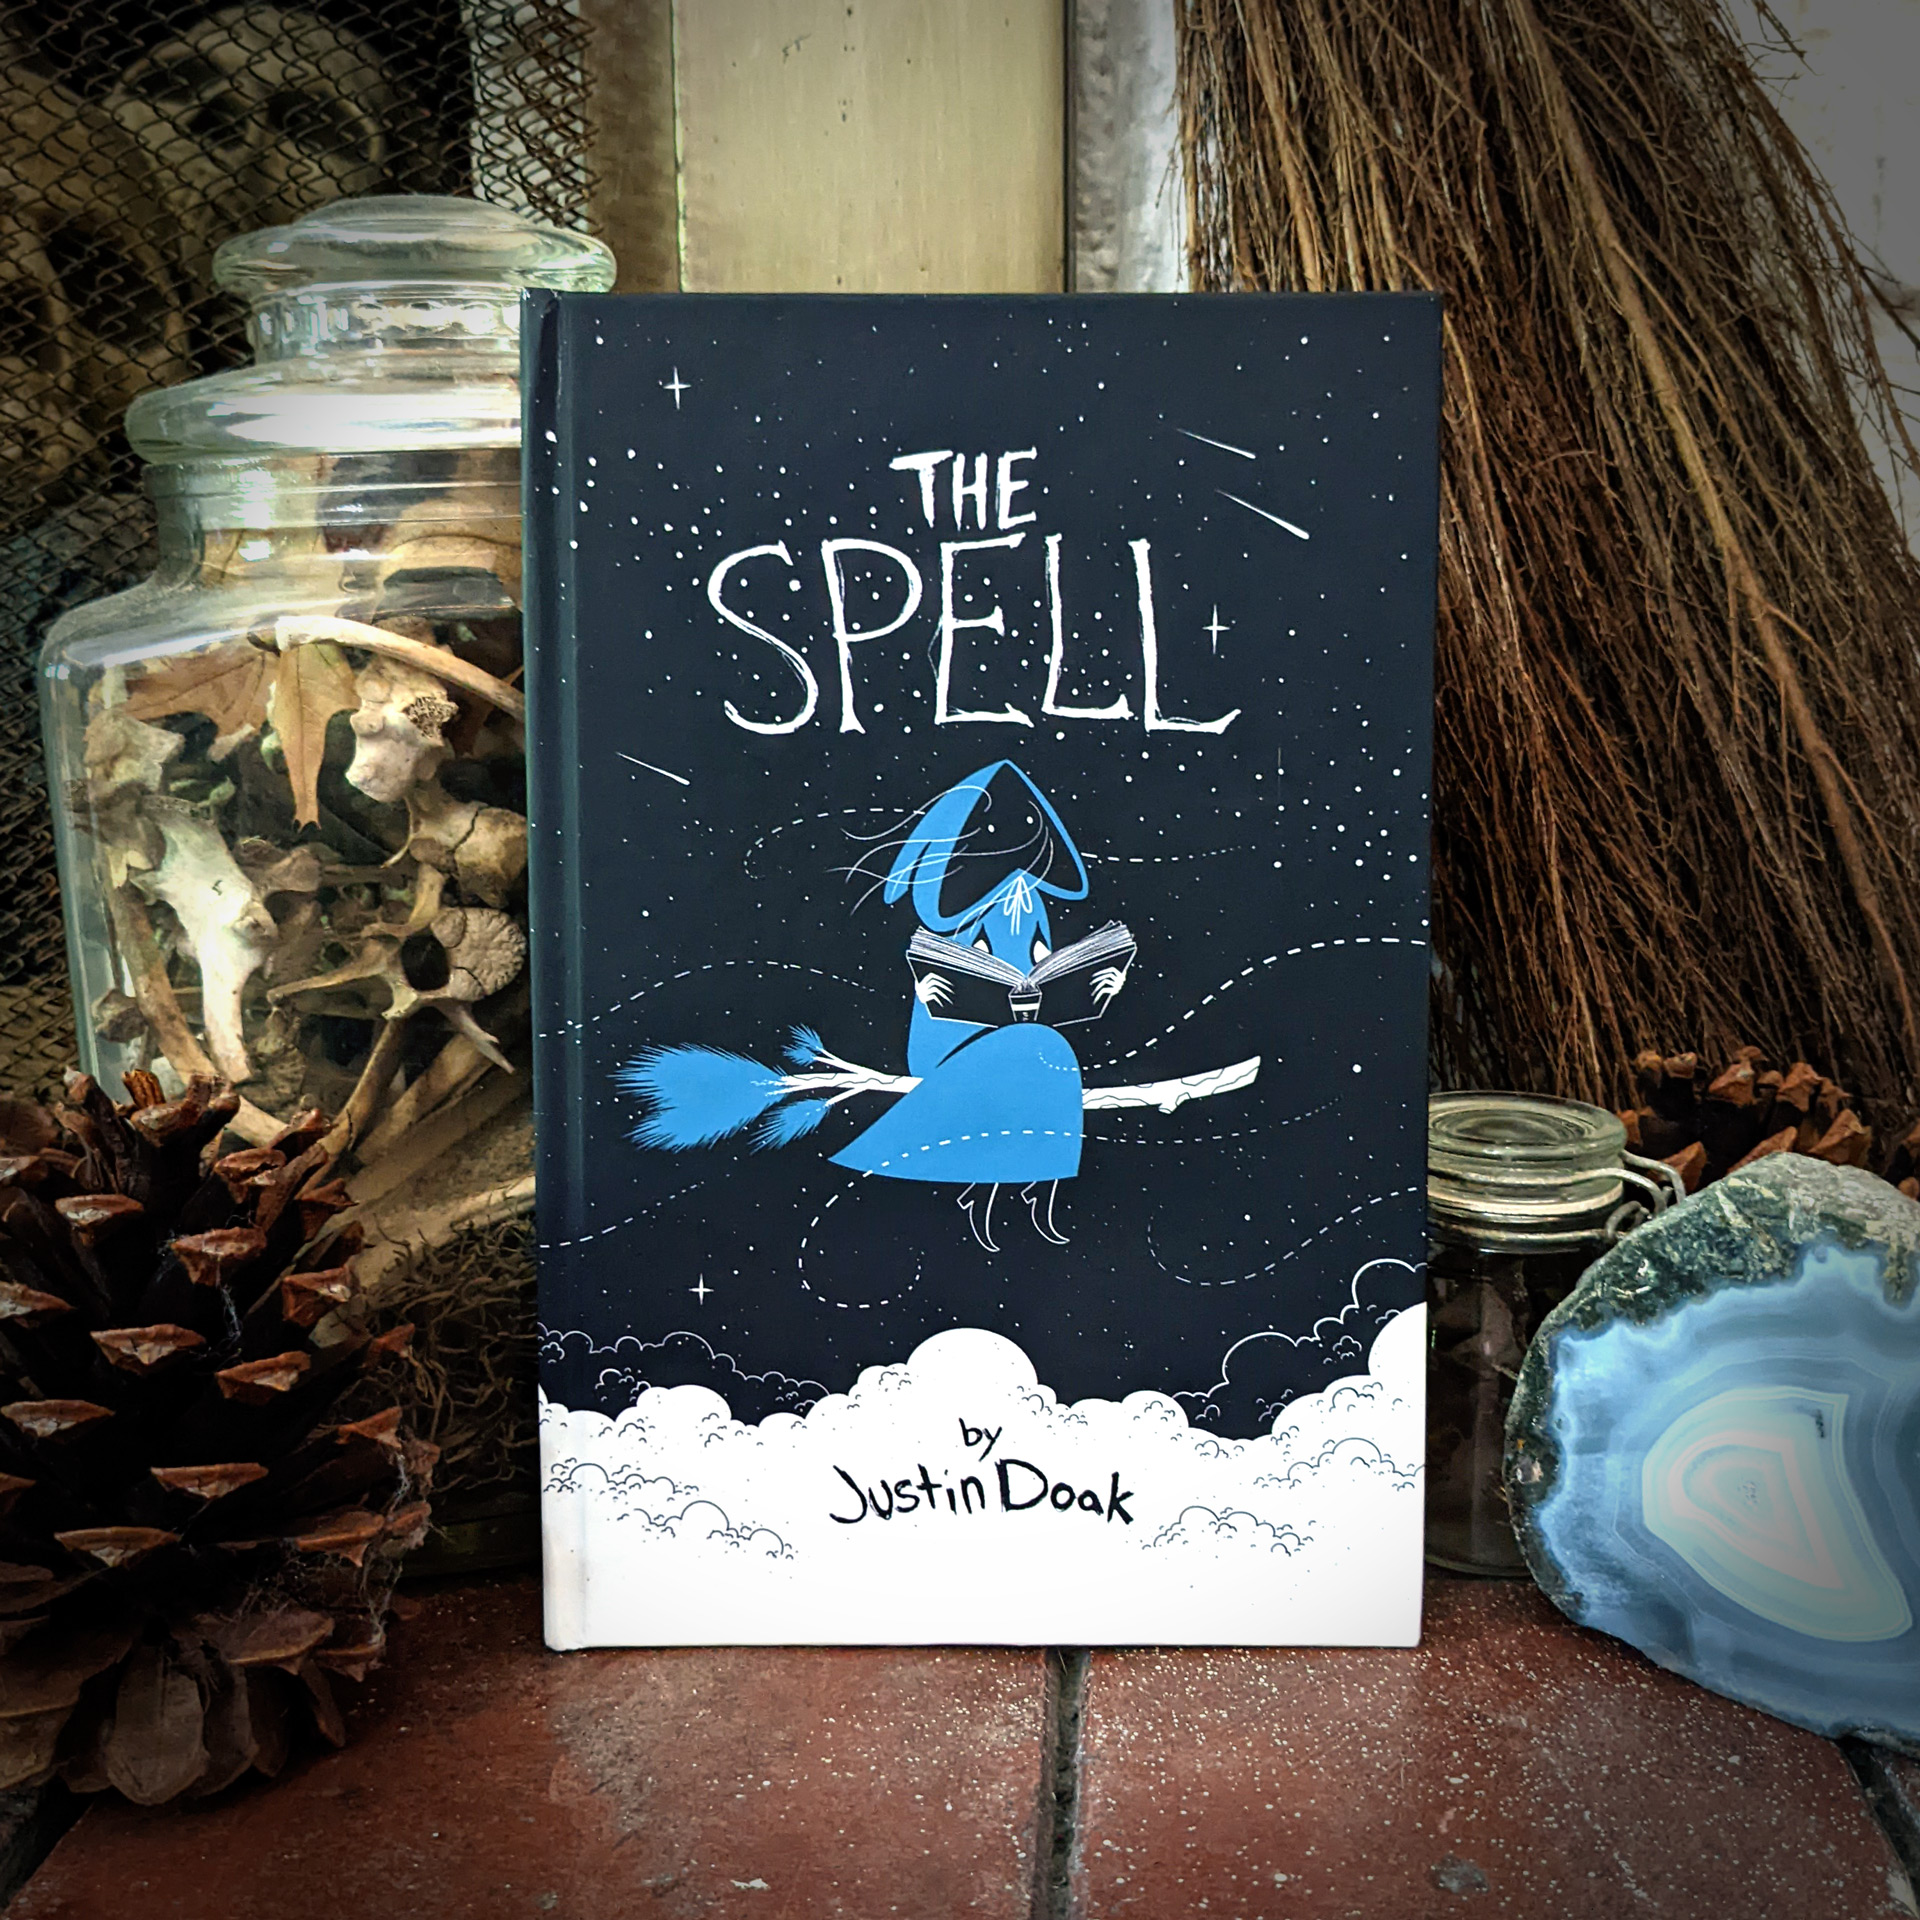 The Spell - A Children's Book by Justin Doak